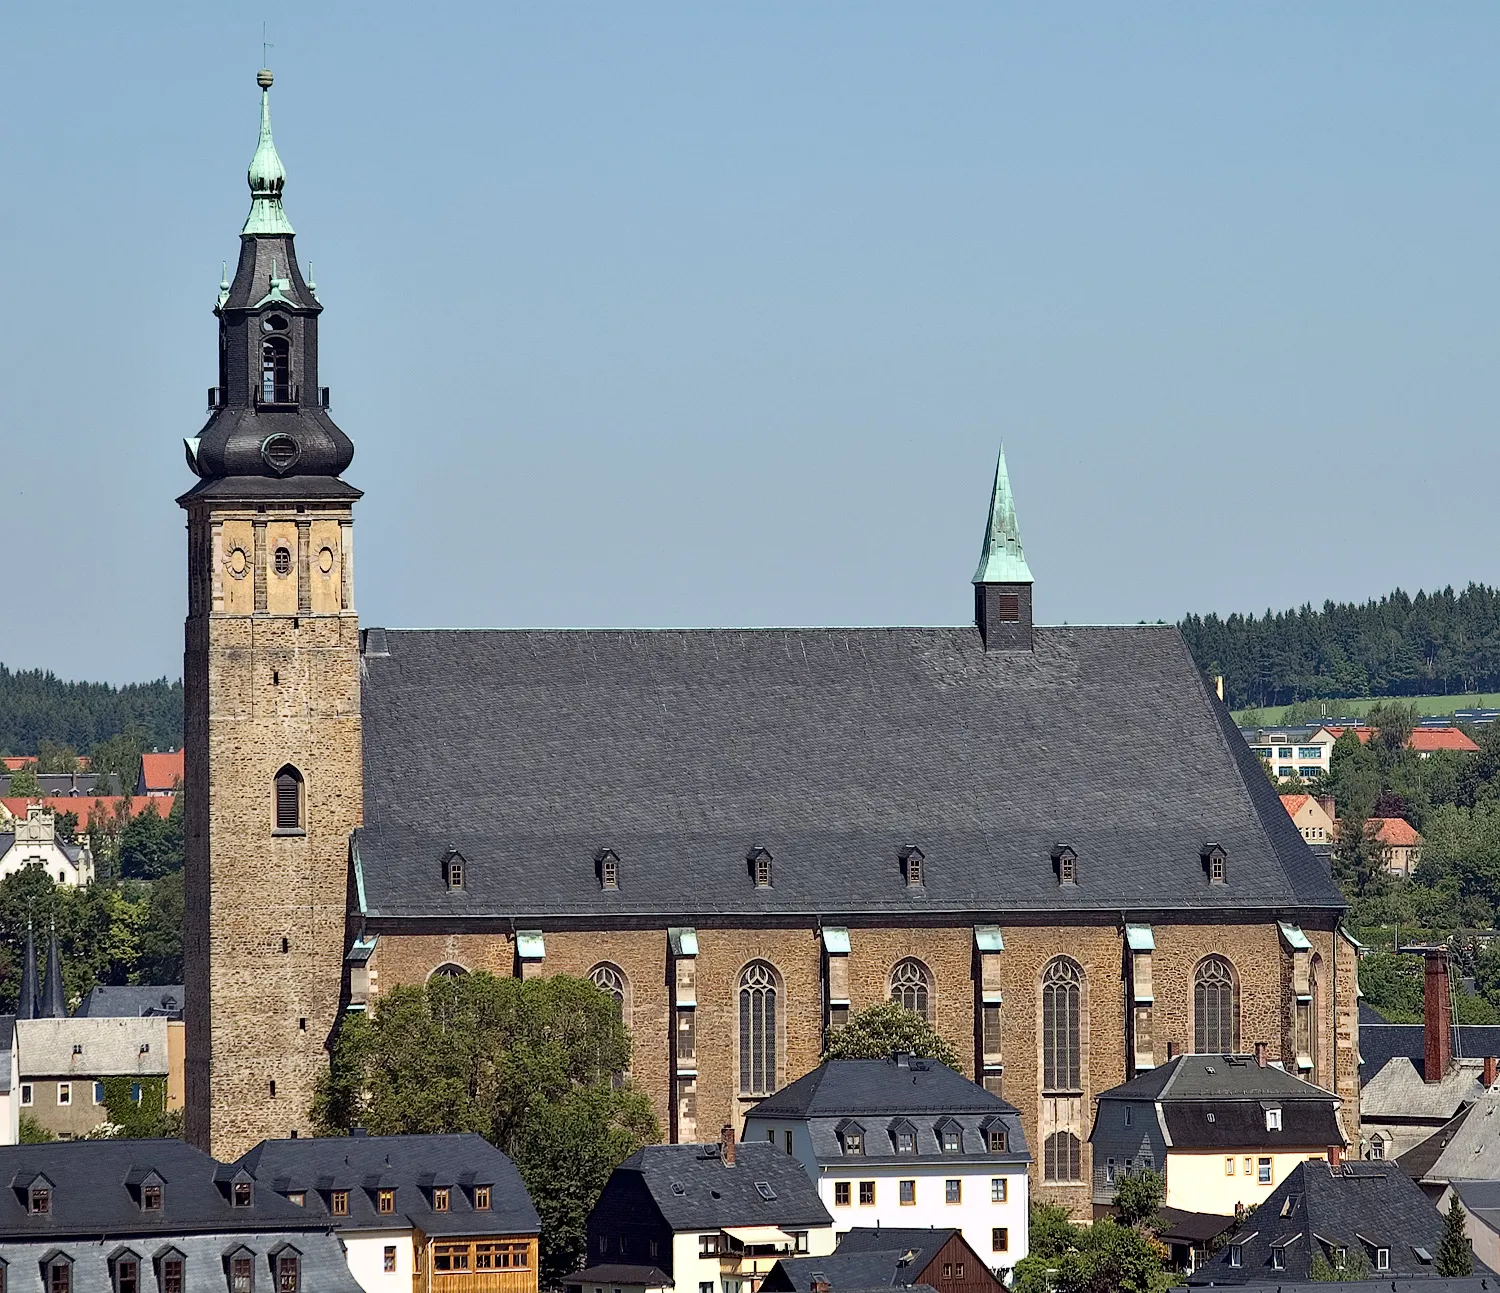 Photo showing: This image shows the church "St. Wolfgangskirche" in Schneeberg (Saxony, Germany).